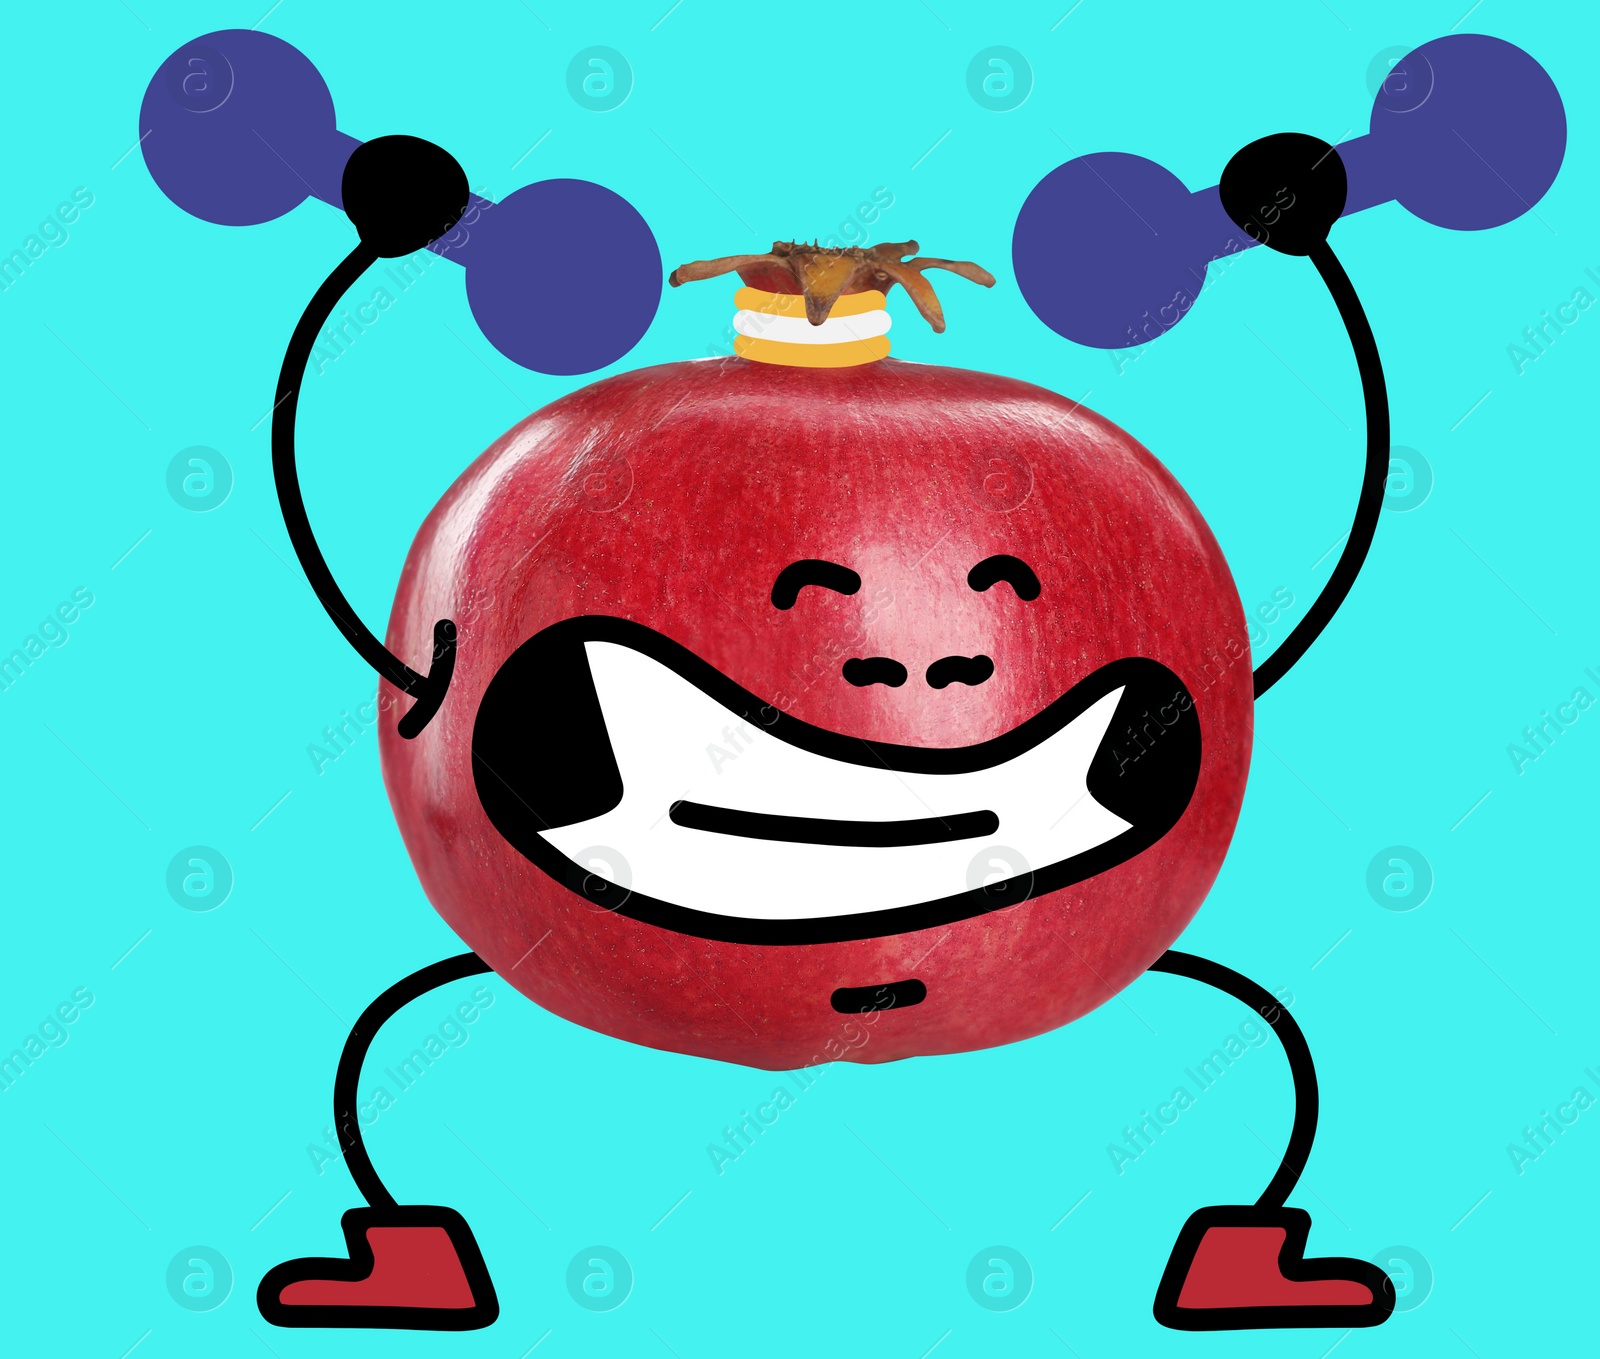 Image of Creative artwork. Pomegranate doing exercises with dumbbells. Berry with drawings on light blue background